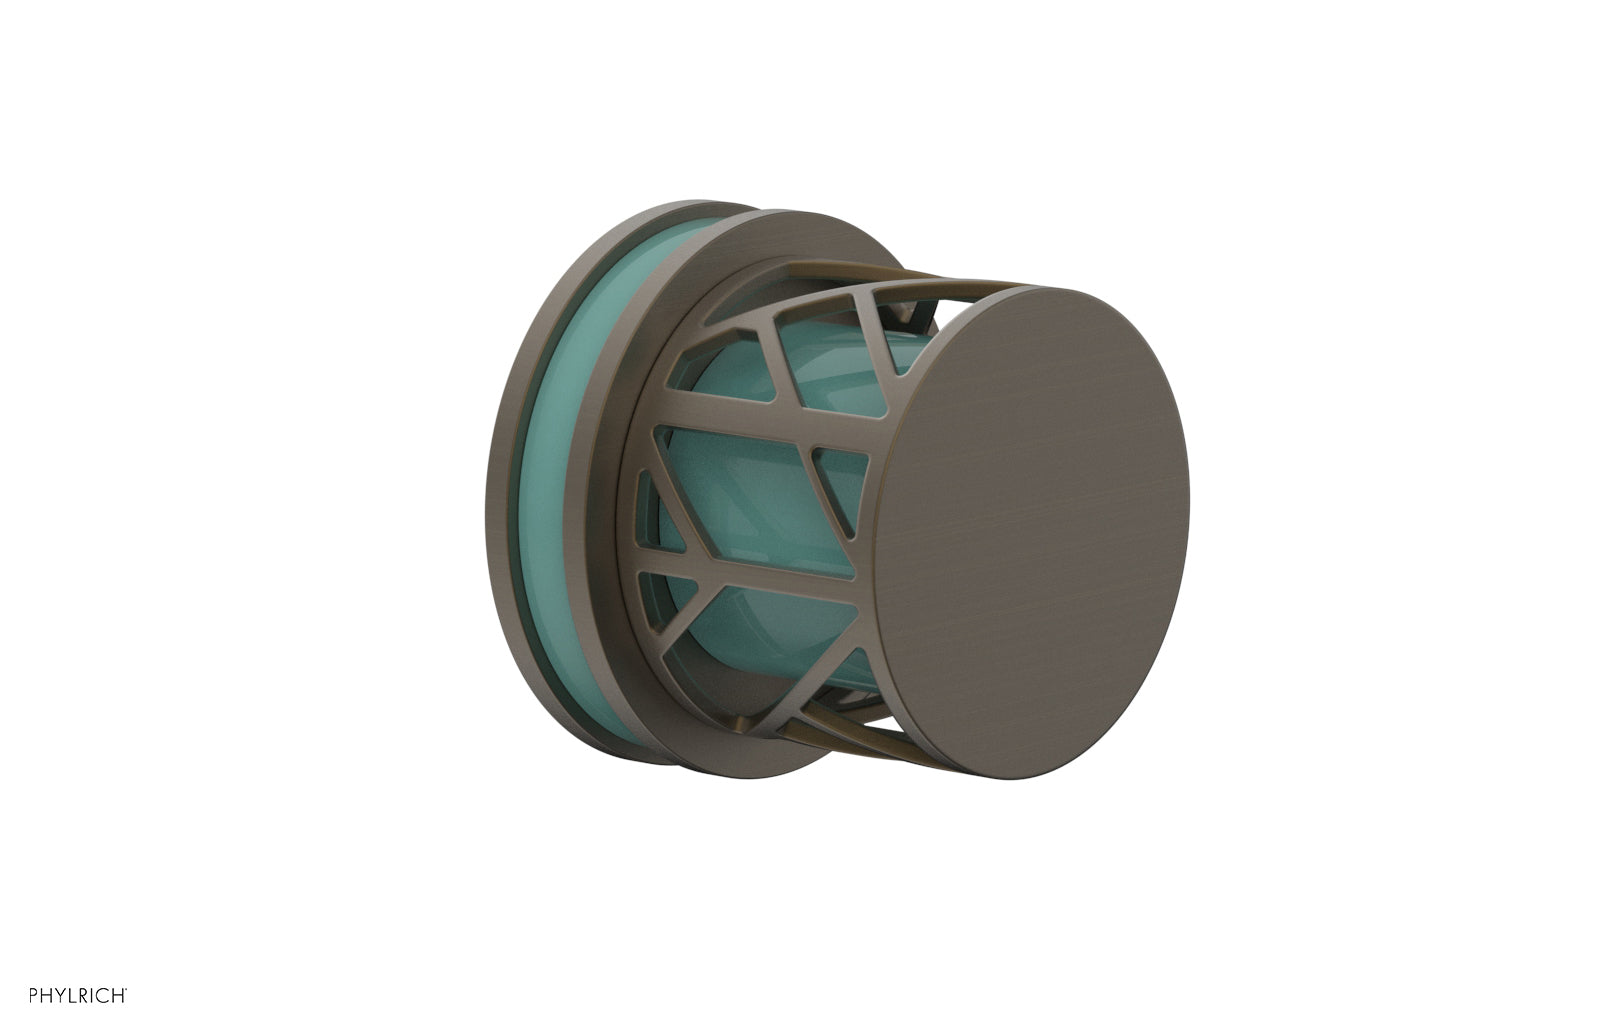 Phylrich JOLIE Volume Control/Diverter Trim - Round Handle with "Turquoise" Accents